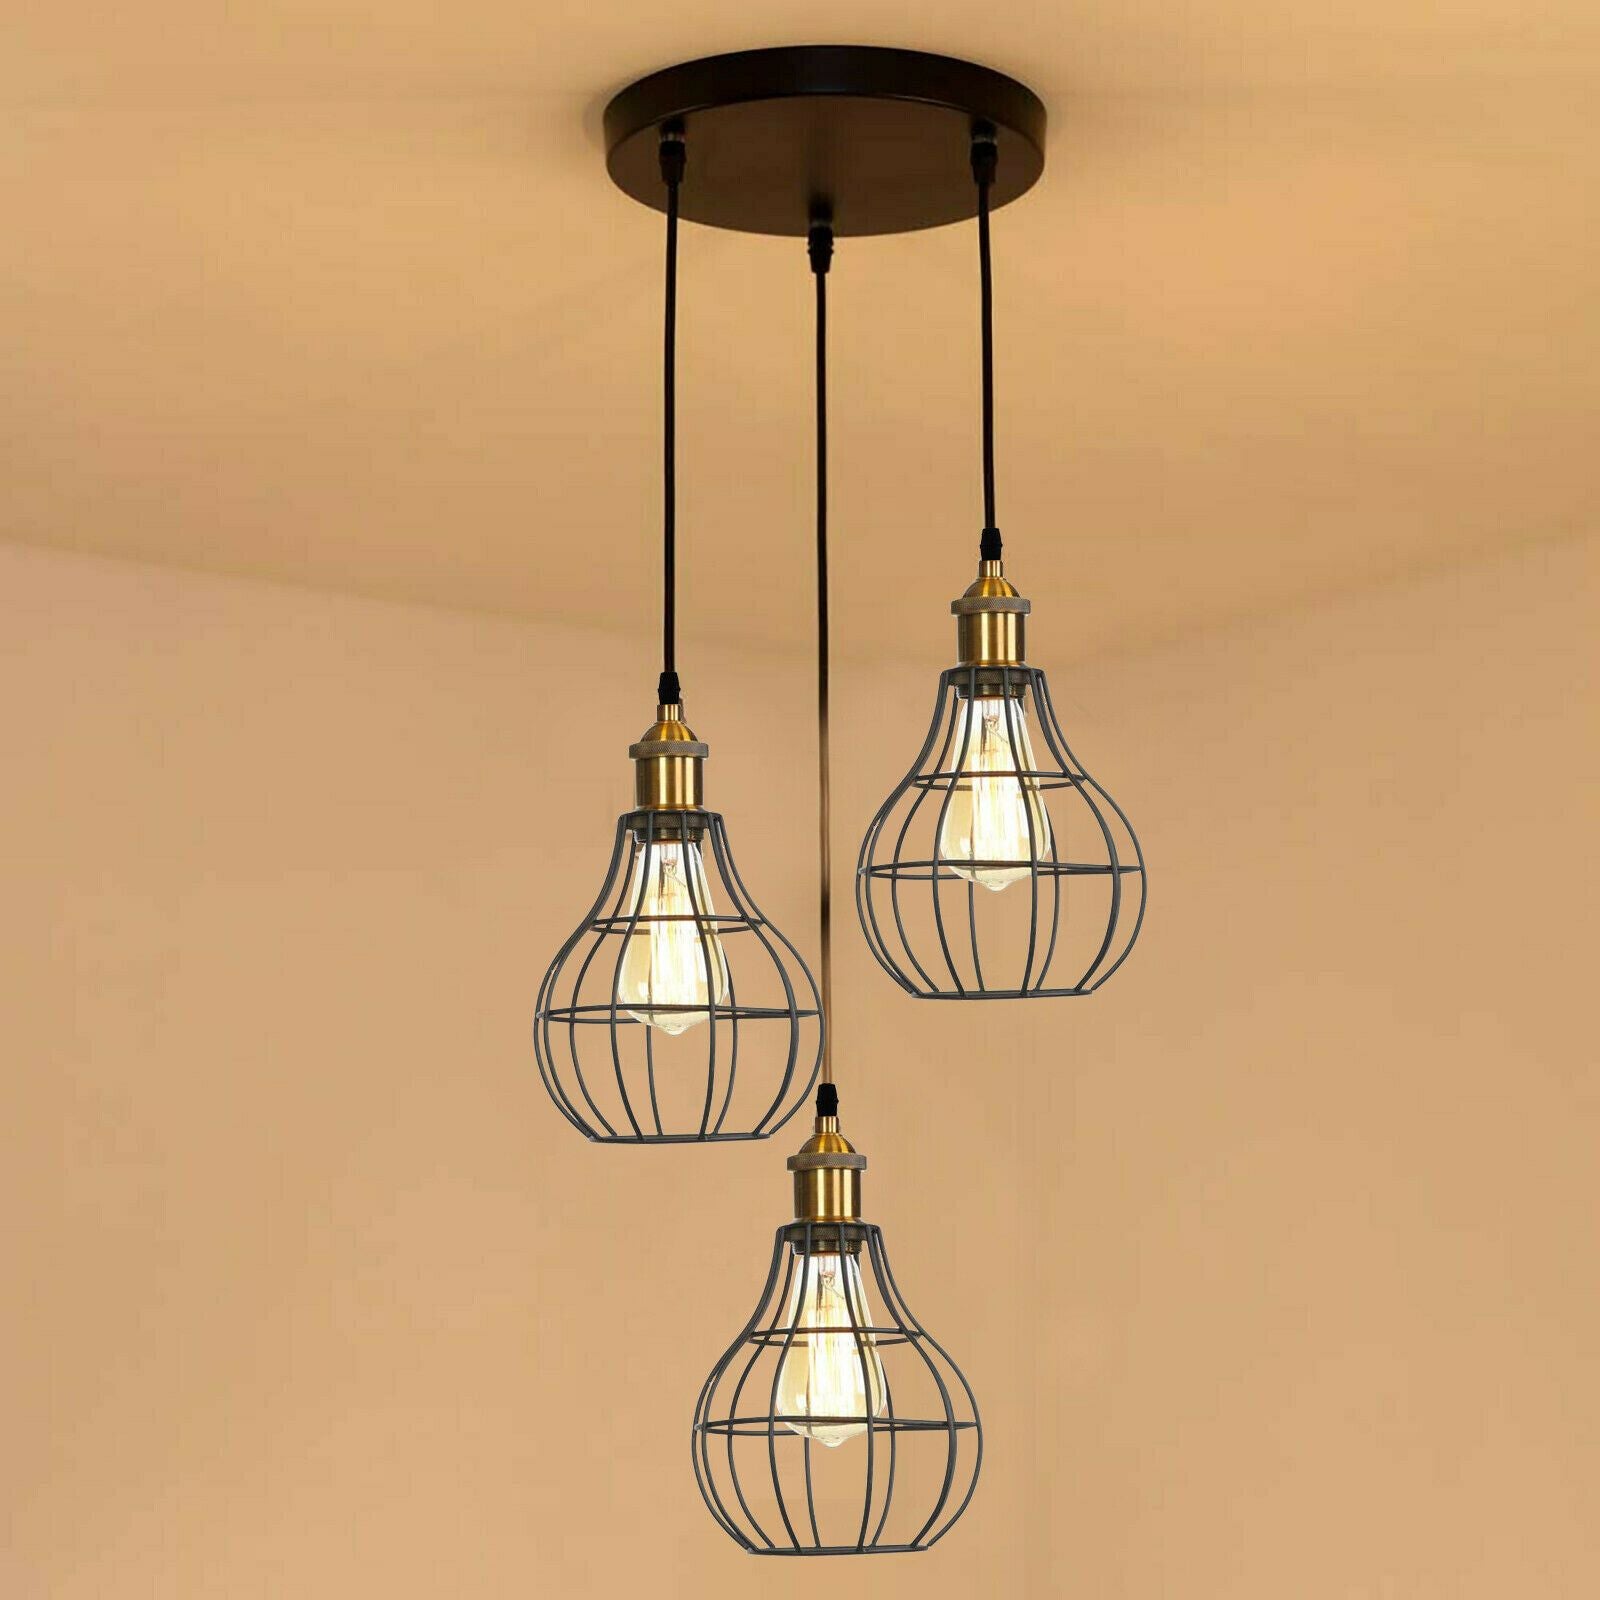  Industrial Wire Cage Style Retro Ceiling Pendant Light 3 Head Ceiling Lamp